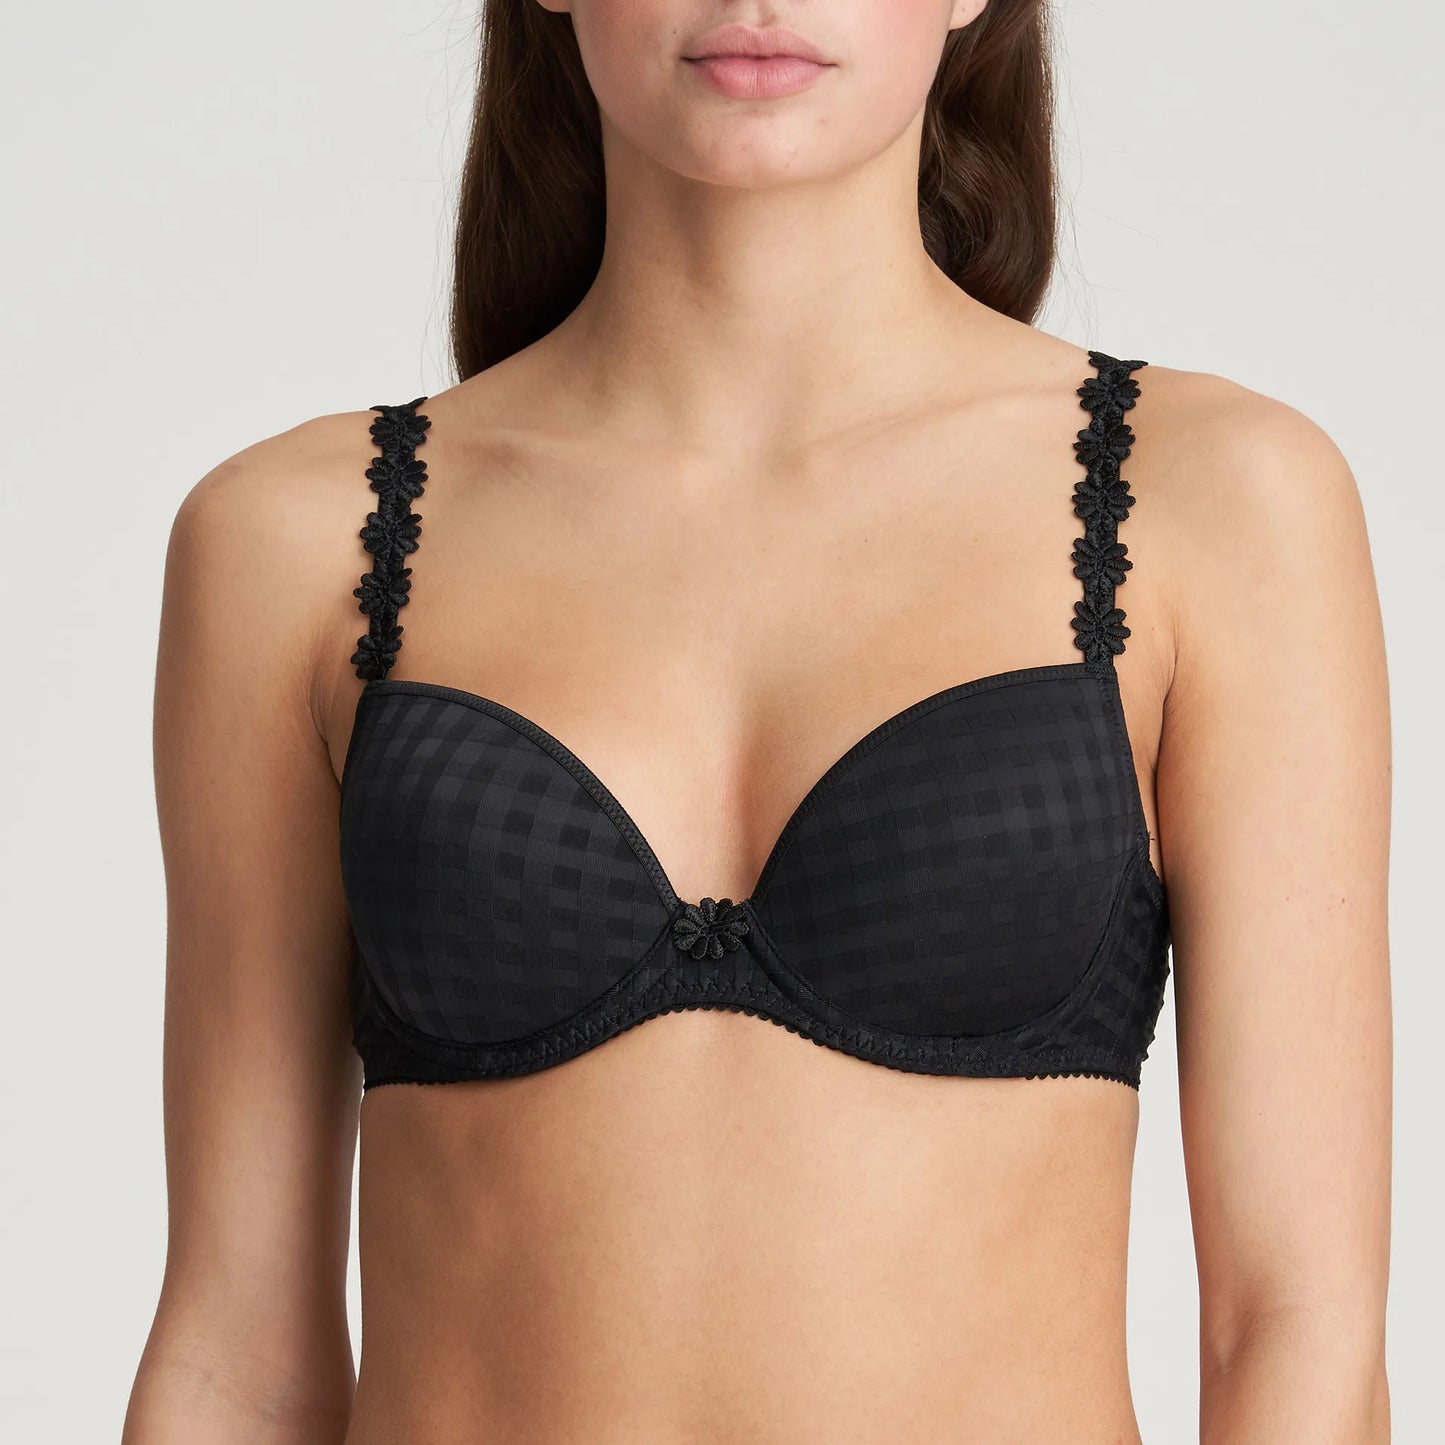 Avero Padded Round Bra in Black worn by model in front view product image